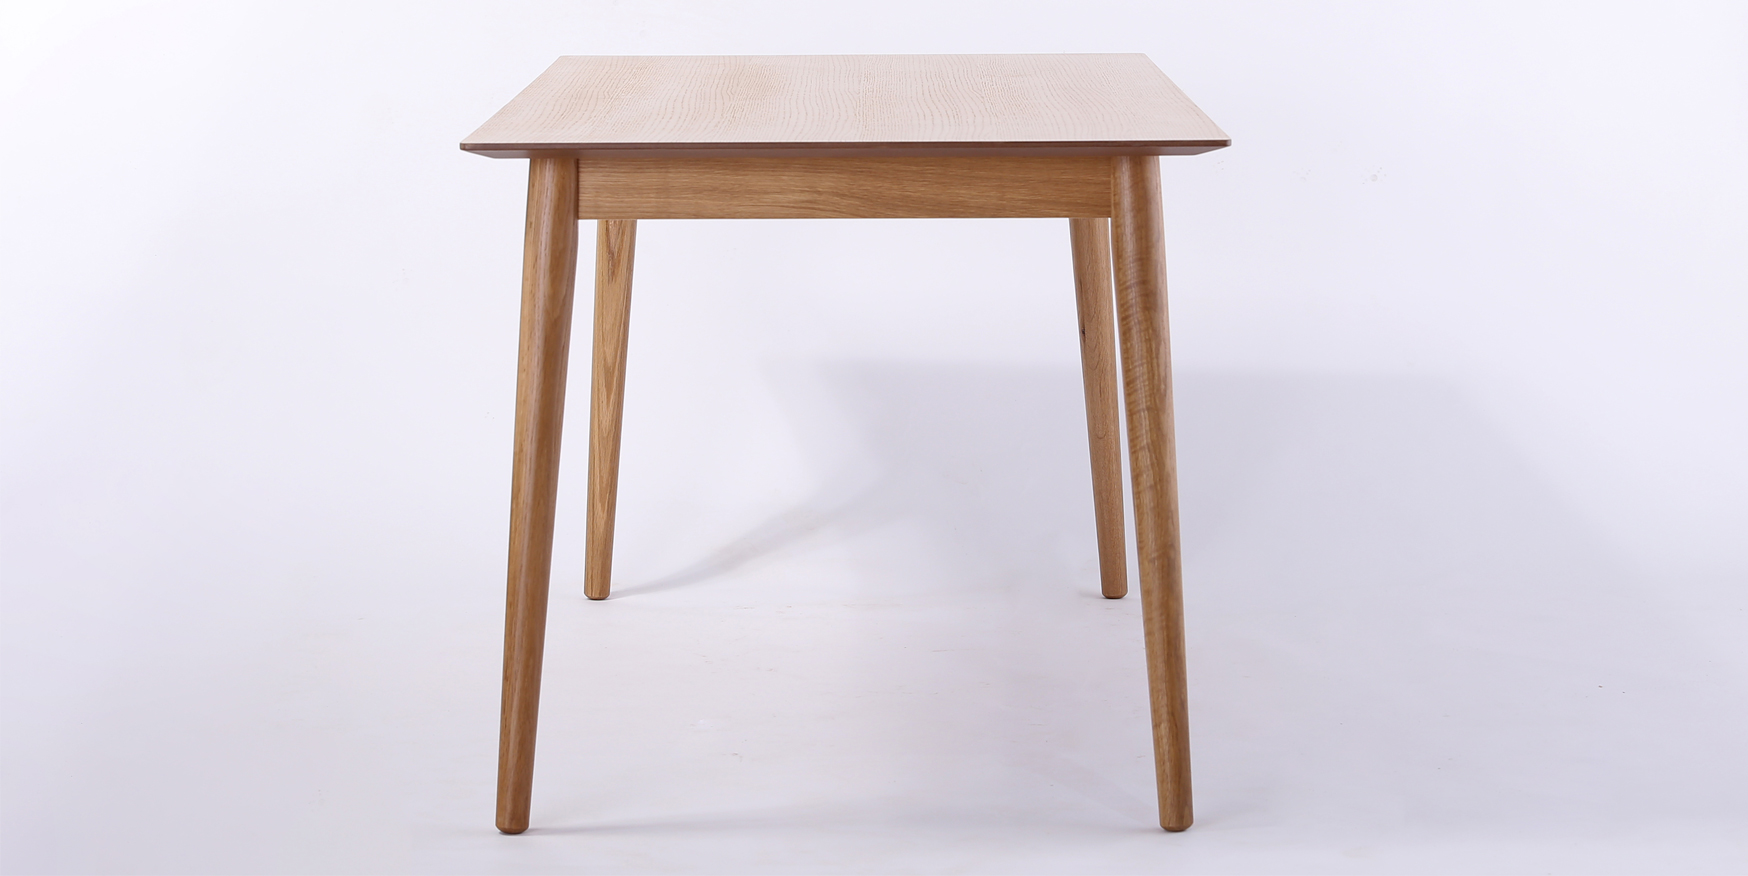 wood dining tables and chairs
